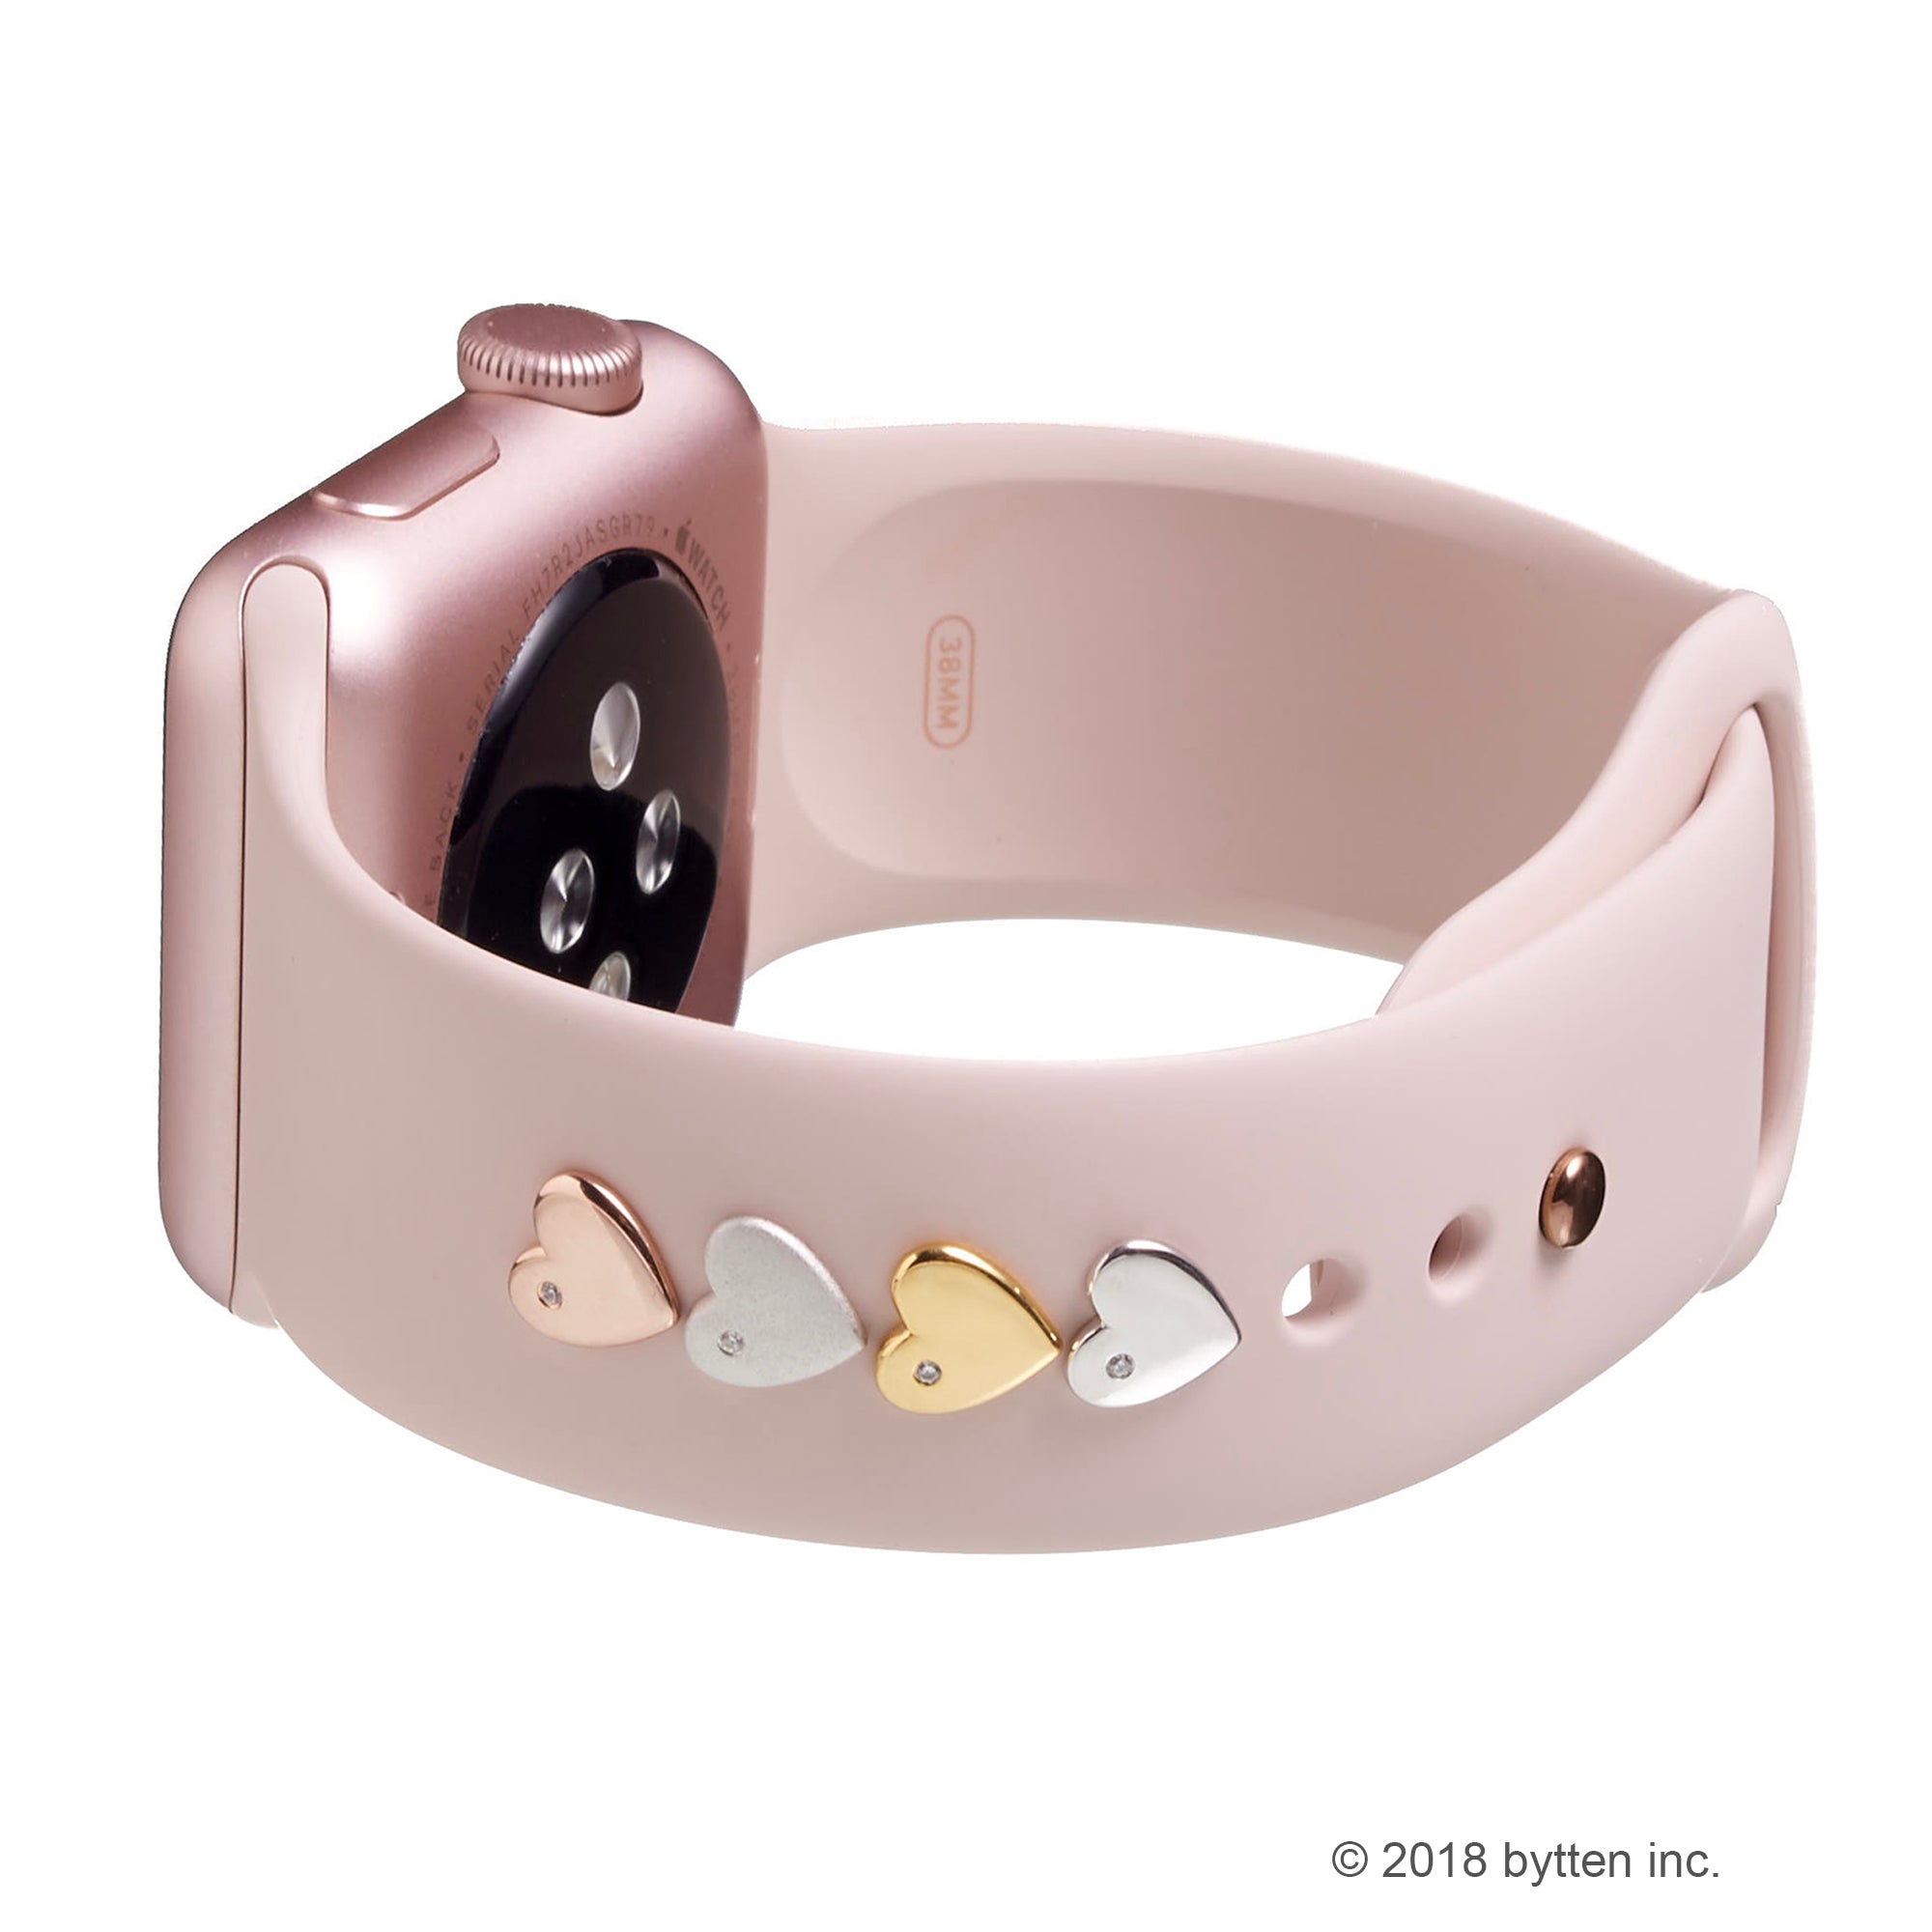 bytten apple watch heart cz iwatch charms in rose gold, silver, gold and satin silver